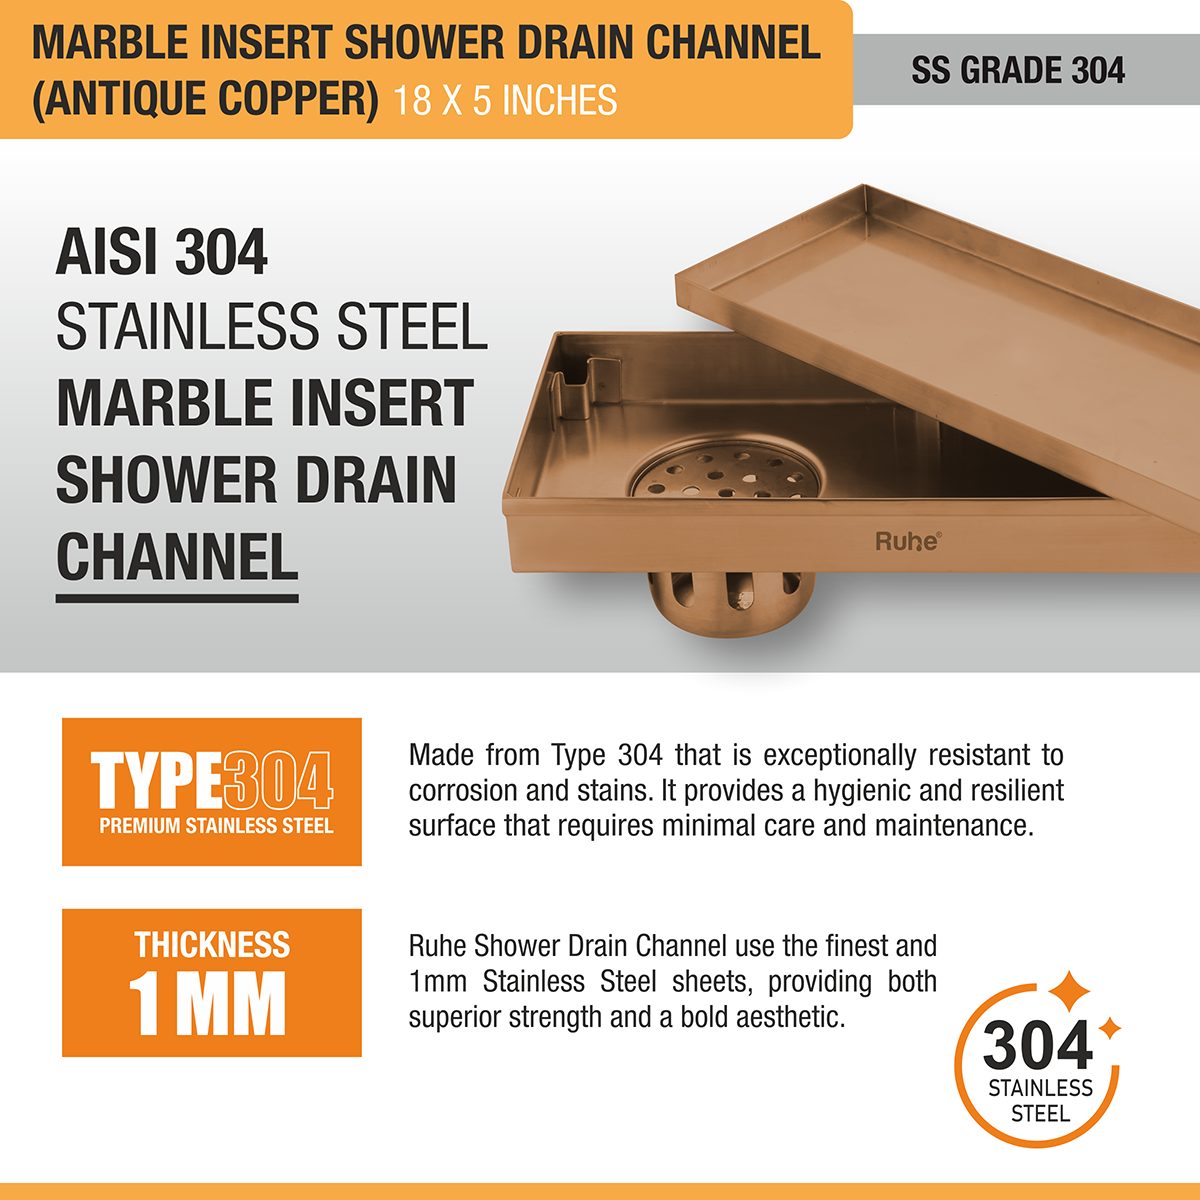 Marble Insert Shower Drain Channel (18 x 5 Inches) ROSE GOLD PVD Coated stainless steel